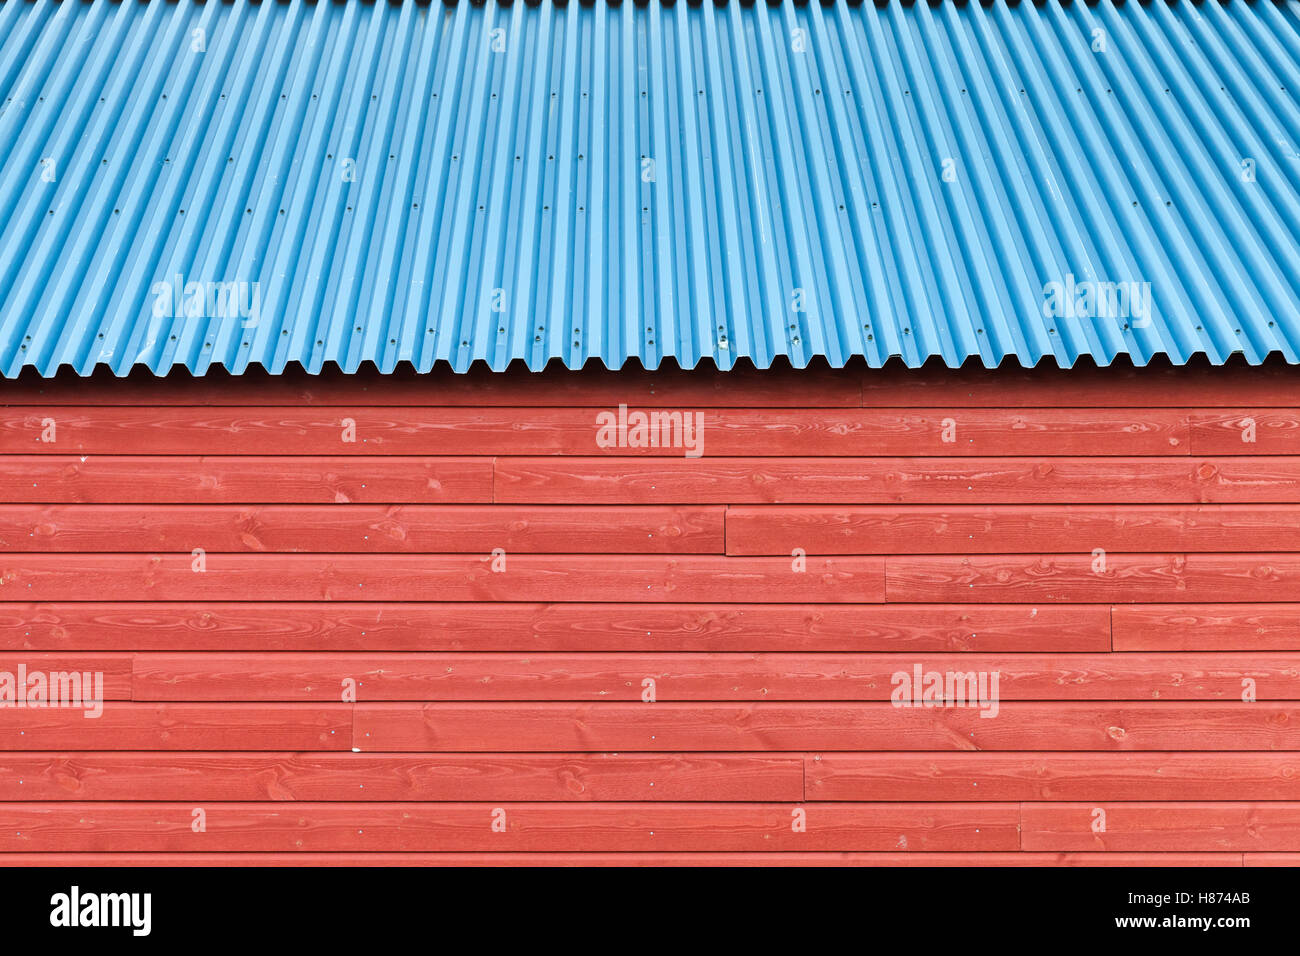 Red wooden wall under blue metal roof, background photo texture Stock Photo